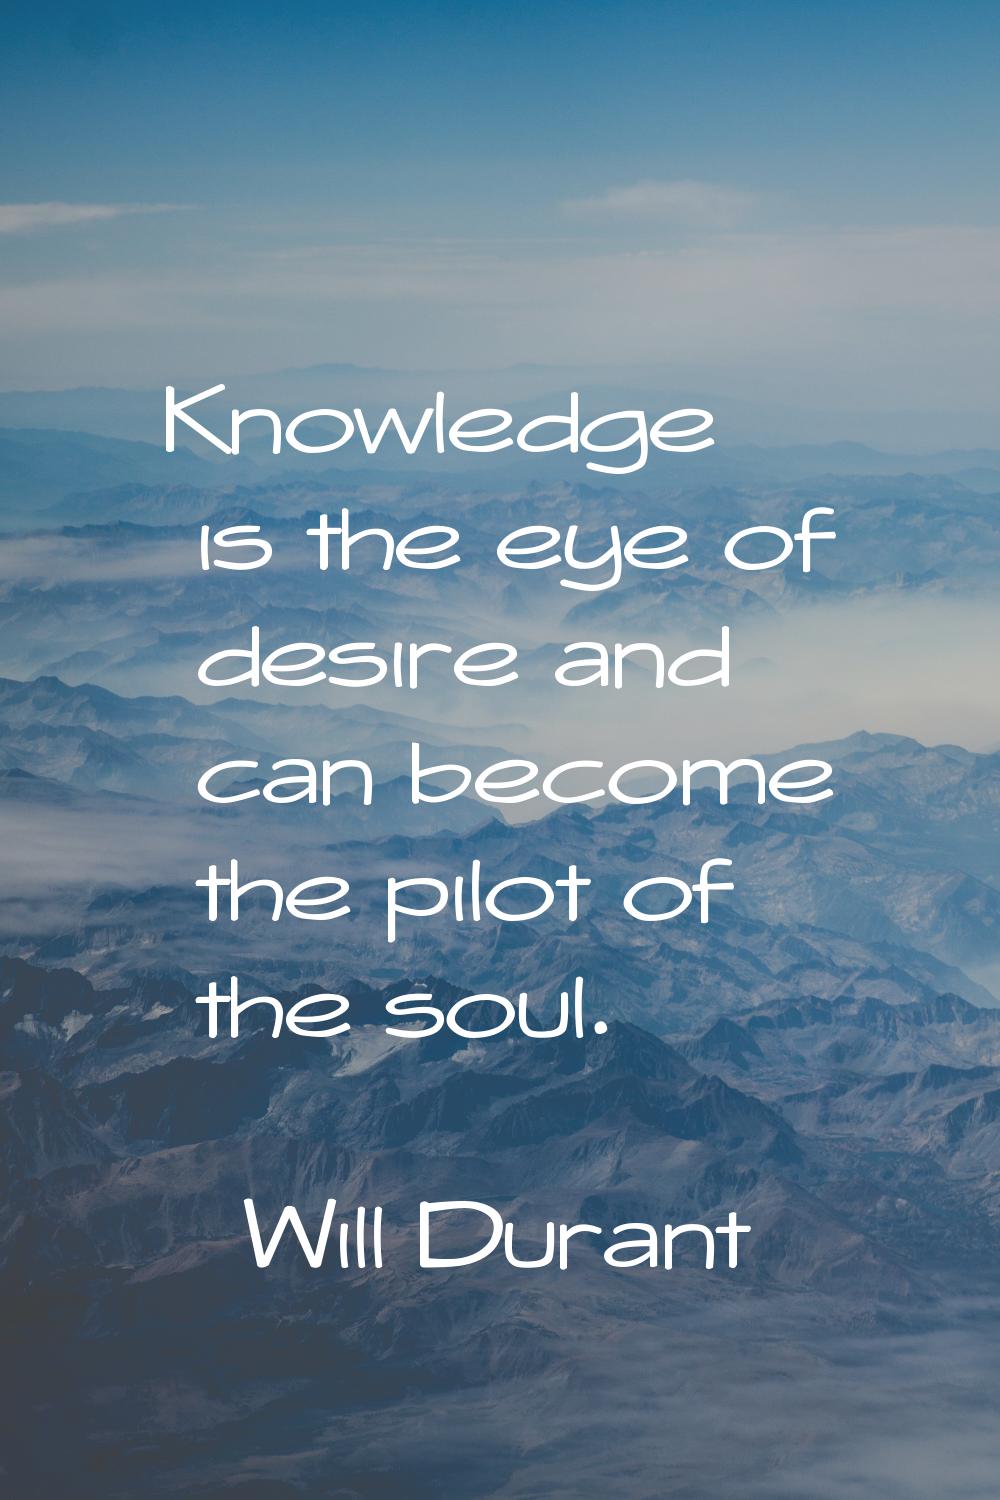 Knowledge is the eye of desire and can become the pilot of the soul.